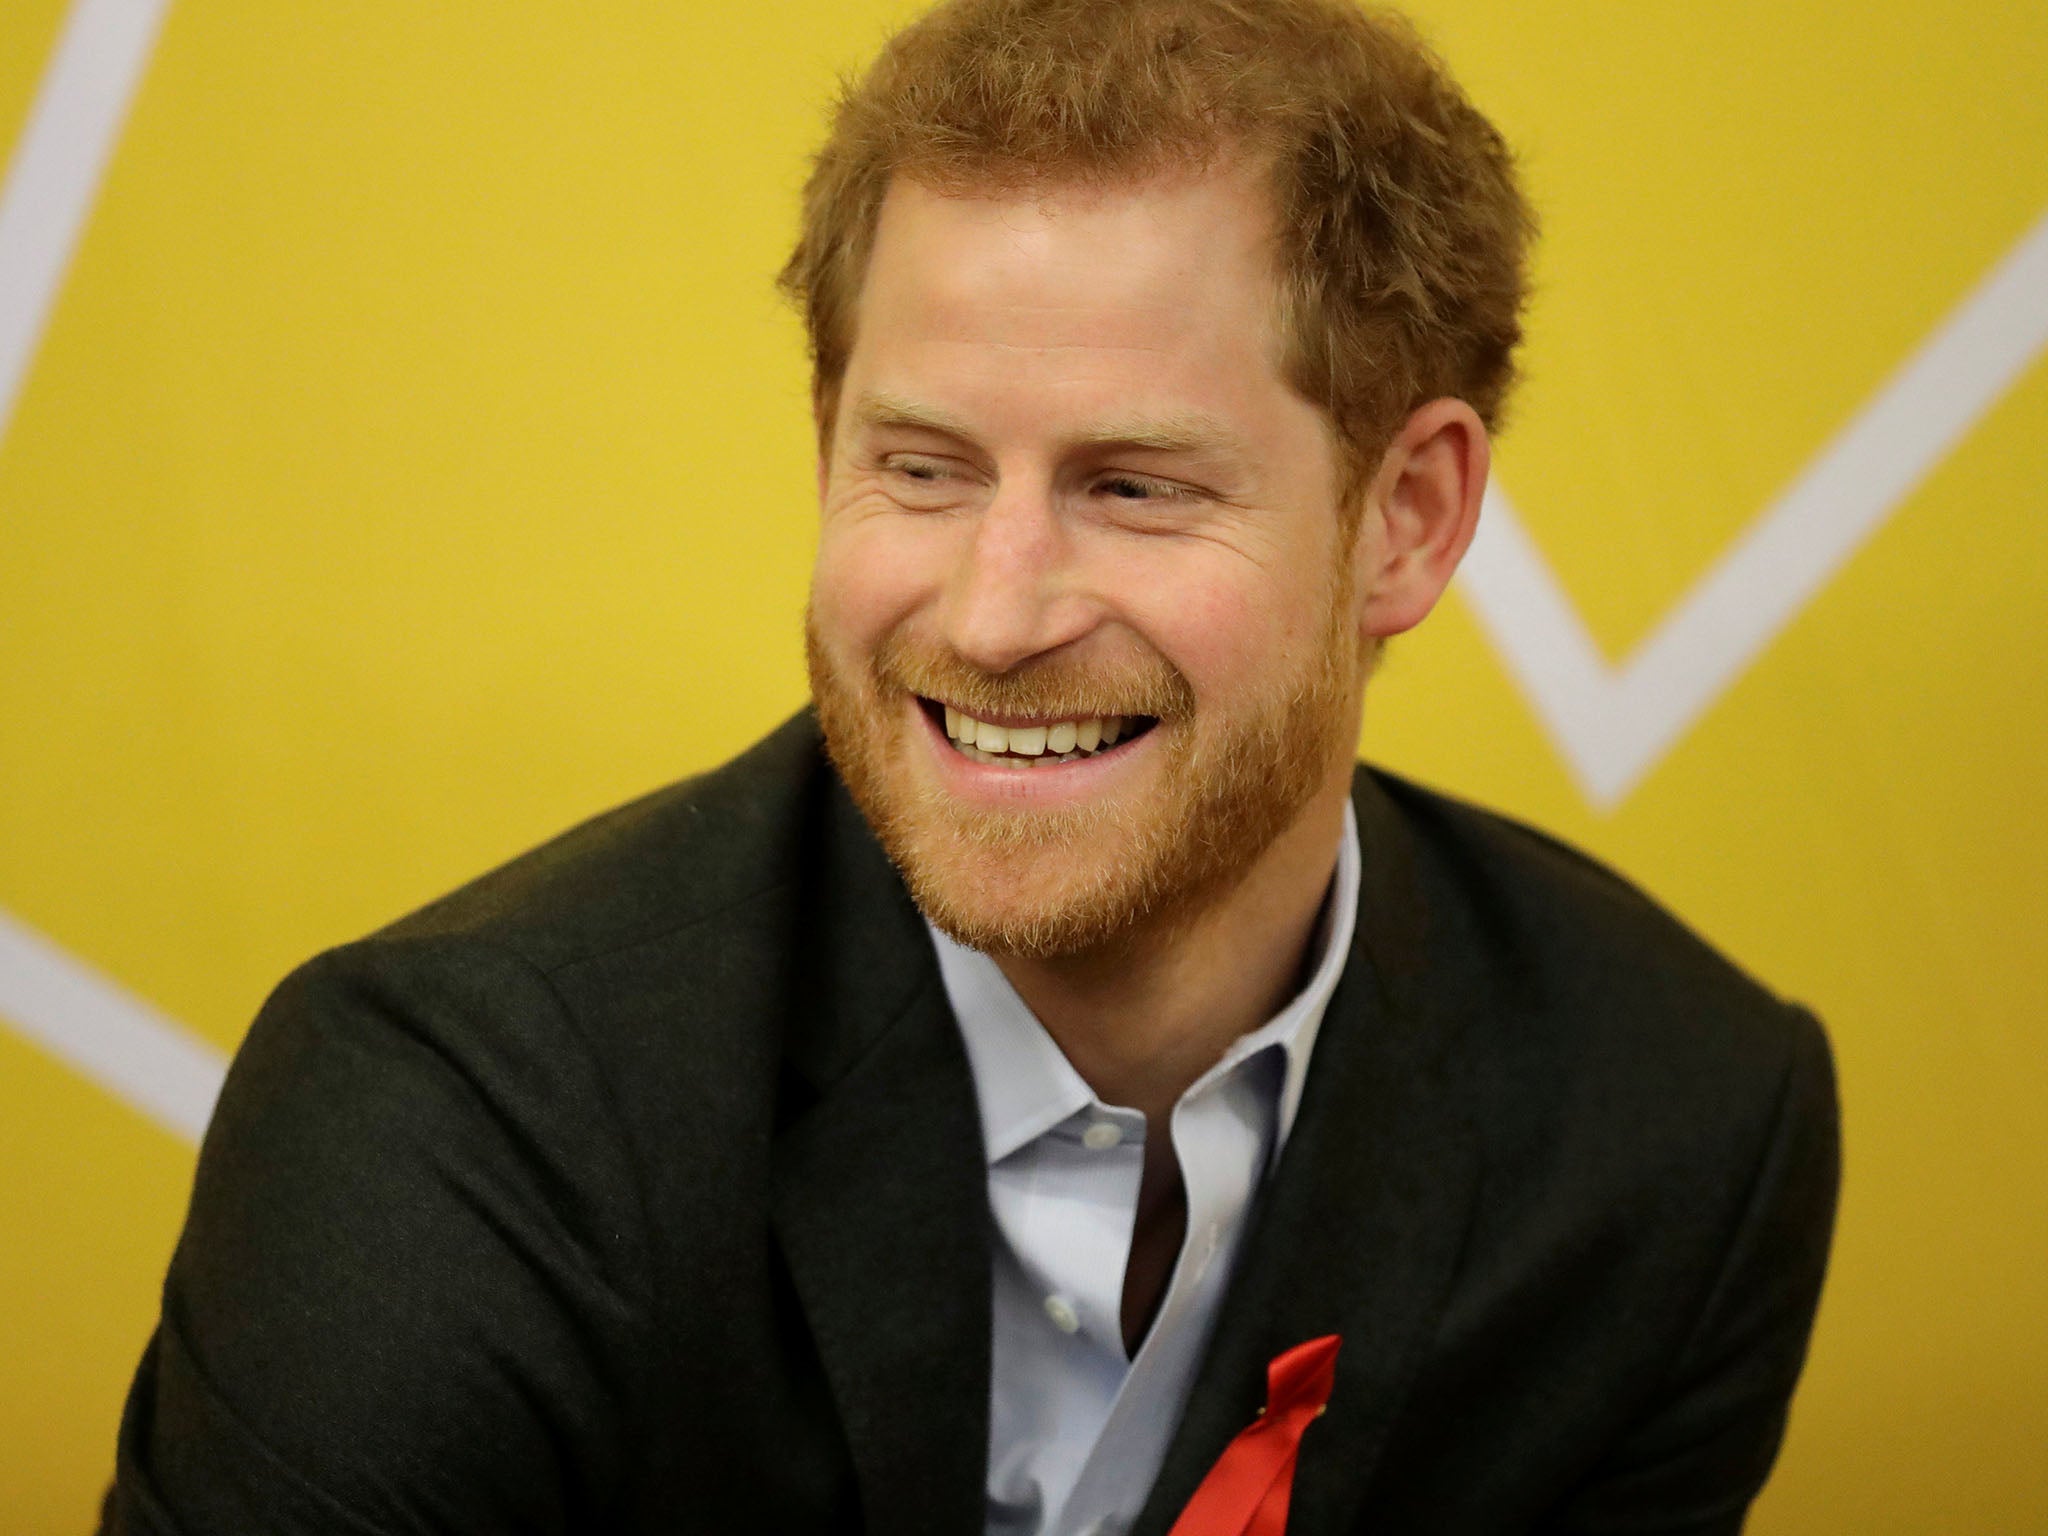 Prince Harry will focus on conservation